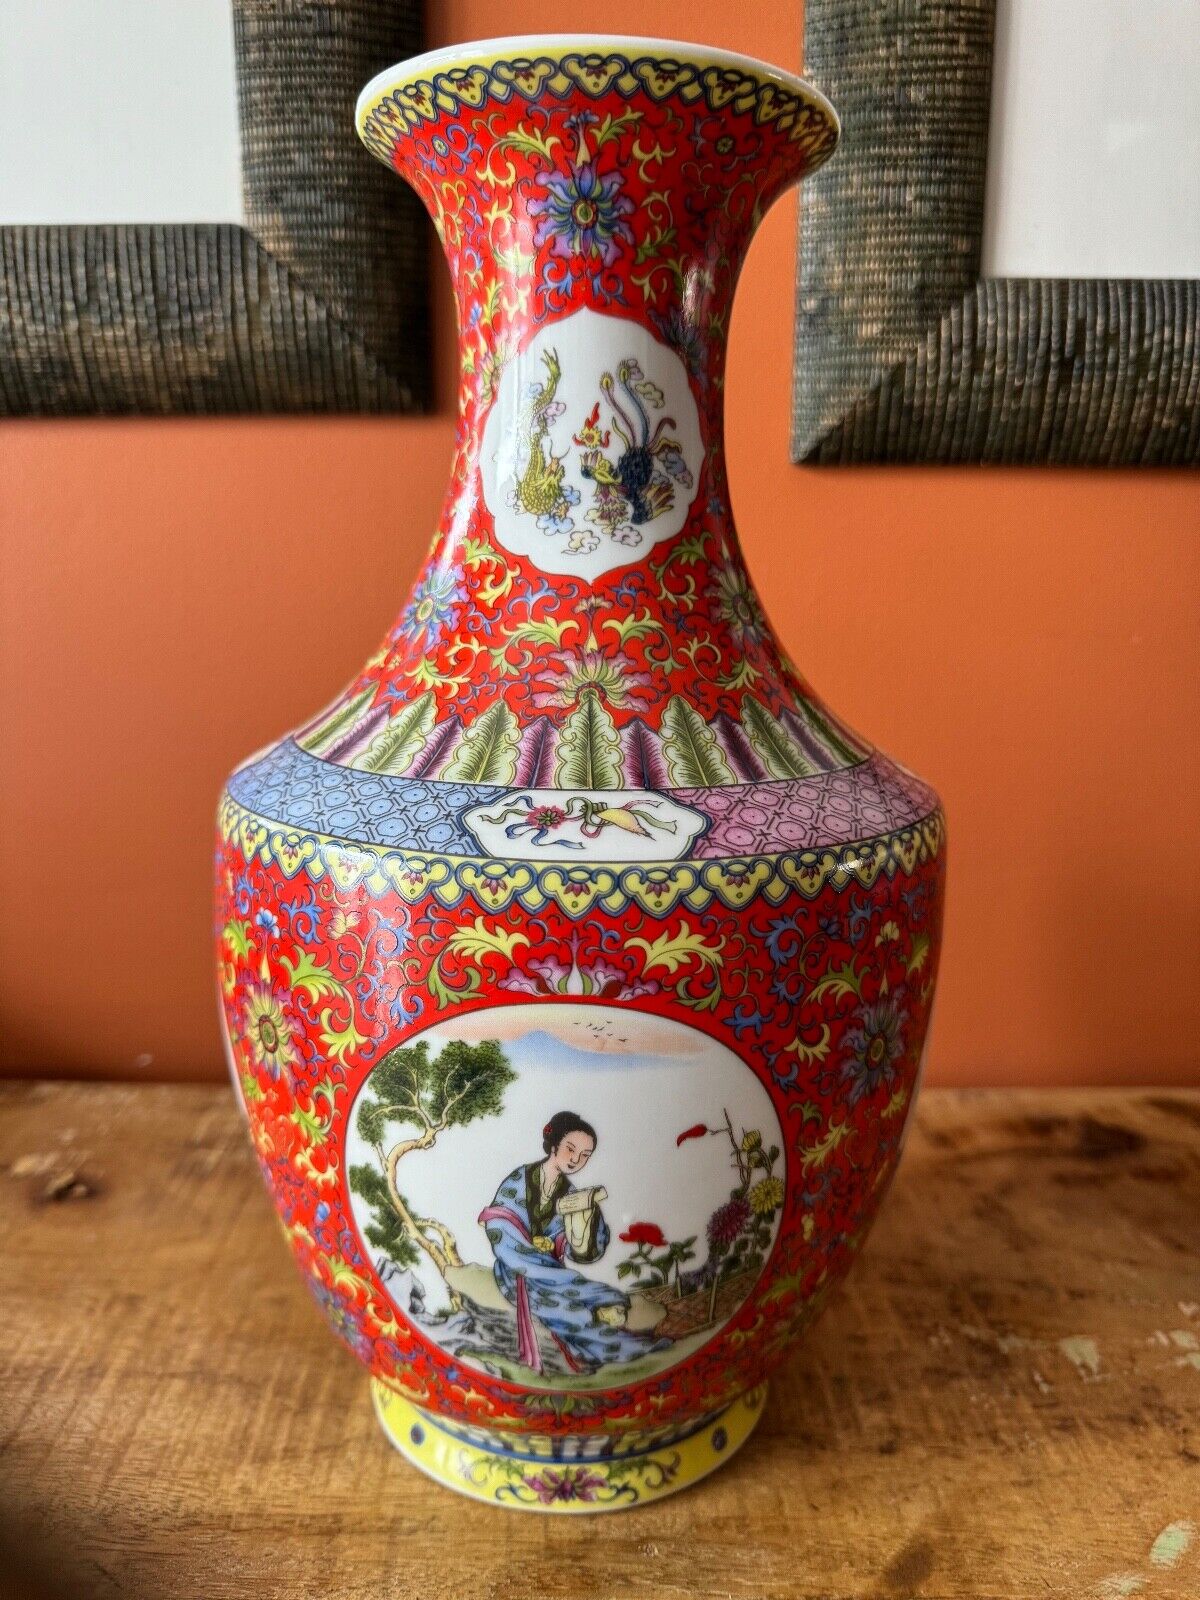 Chinese Asian Porcelain Vase Red Floral with Geisha Figures 12